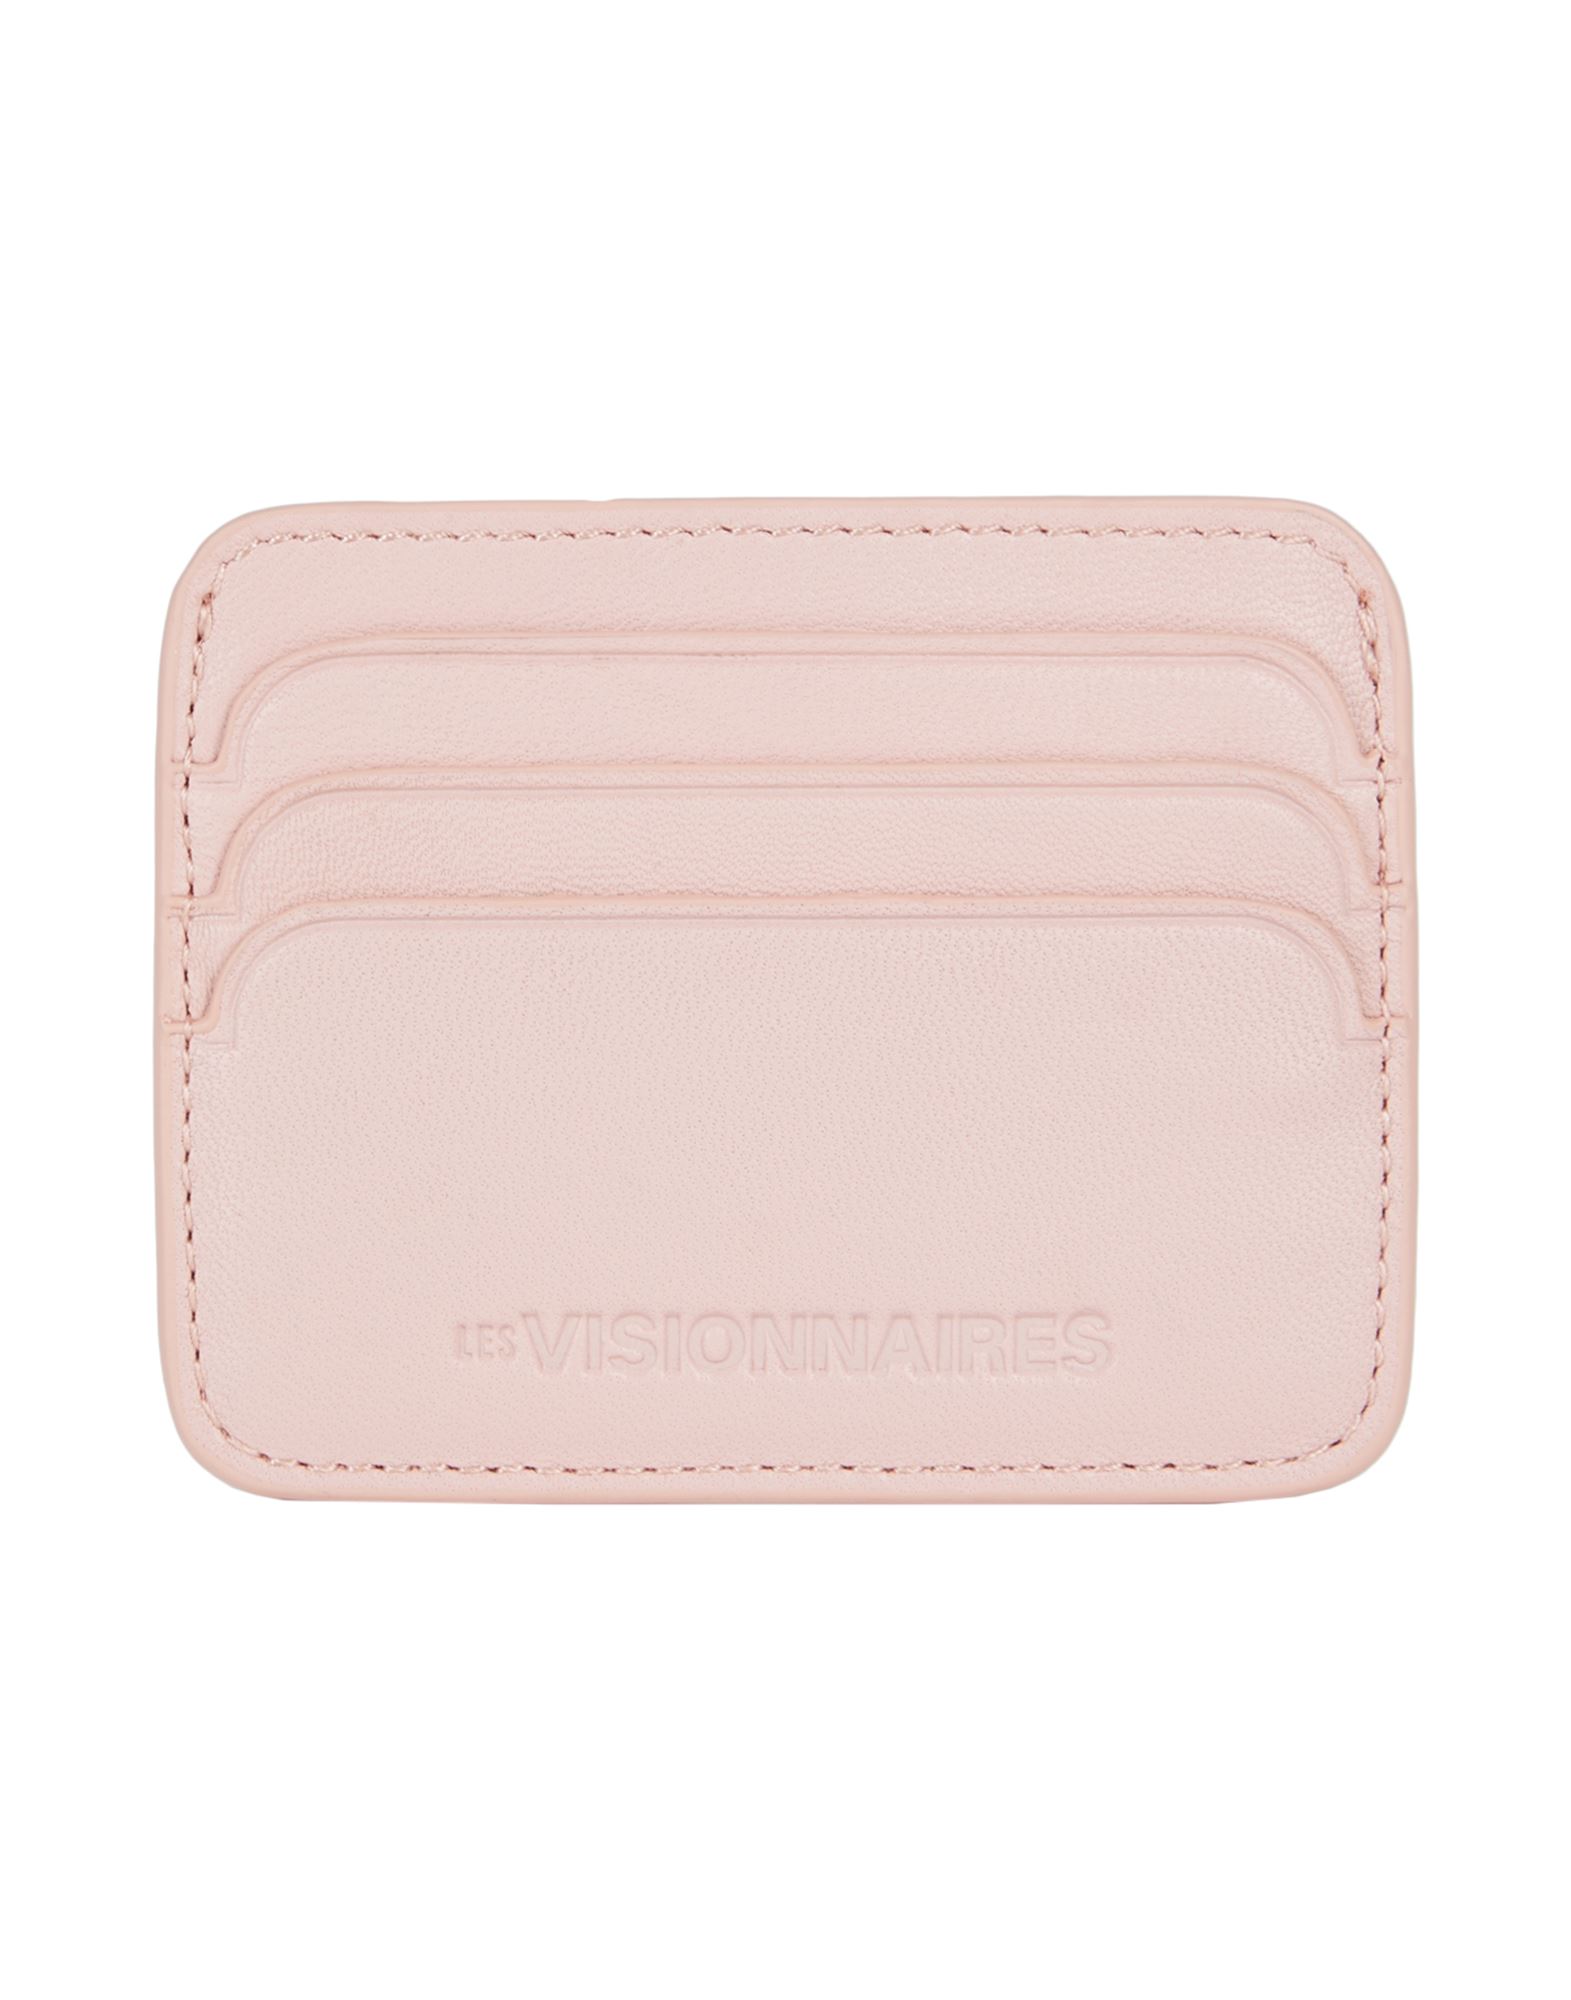 Les Visionnaires Document Holders In Pink